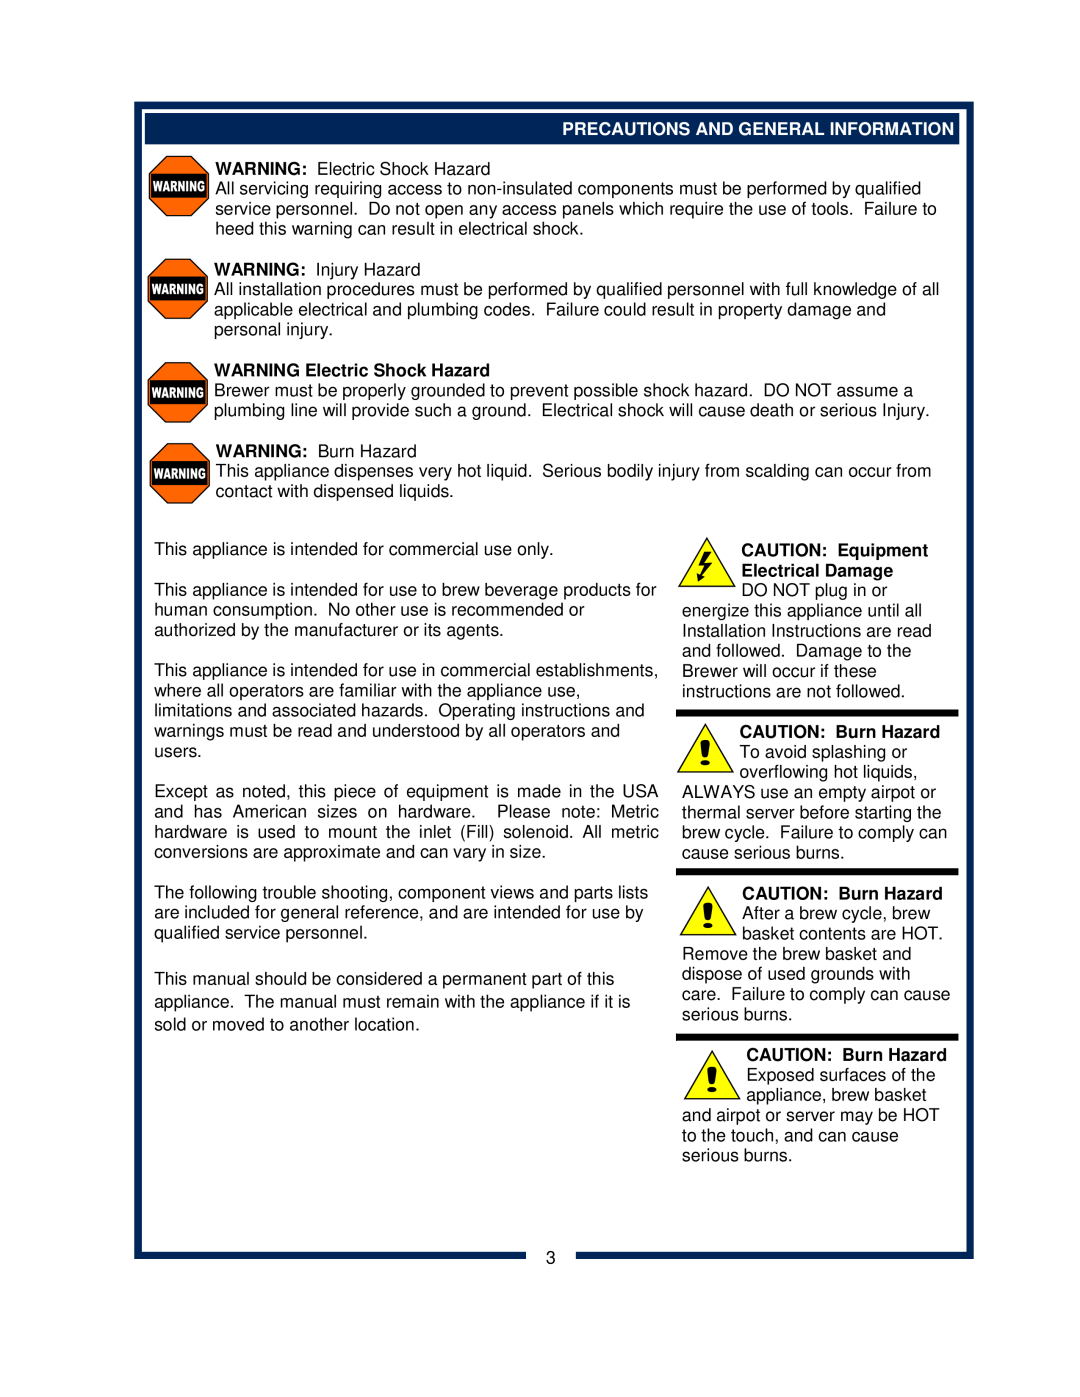 Bloomfield 2280 Precautions And General Information, WARNING Electric Shock Hazard, CAUTION Equipment Electrical Damage 